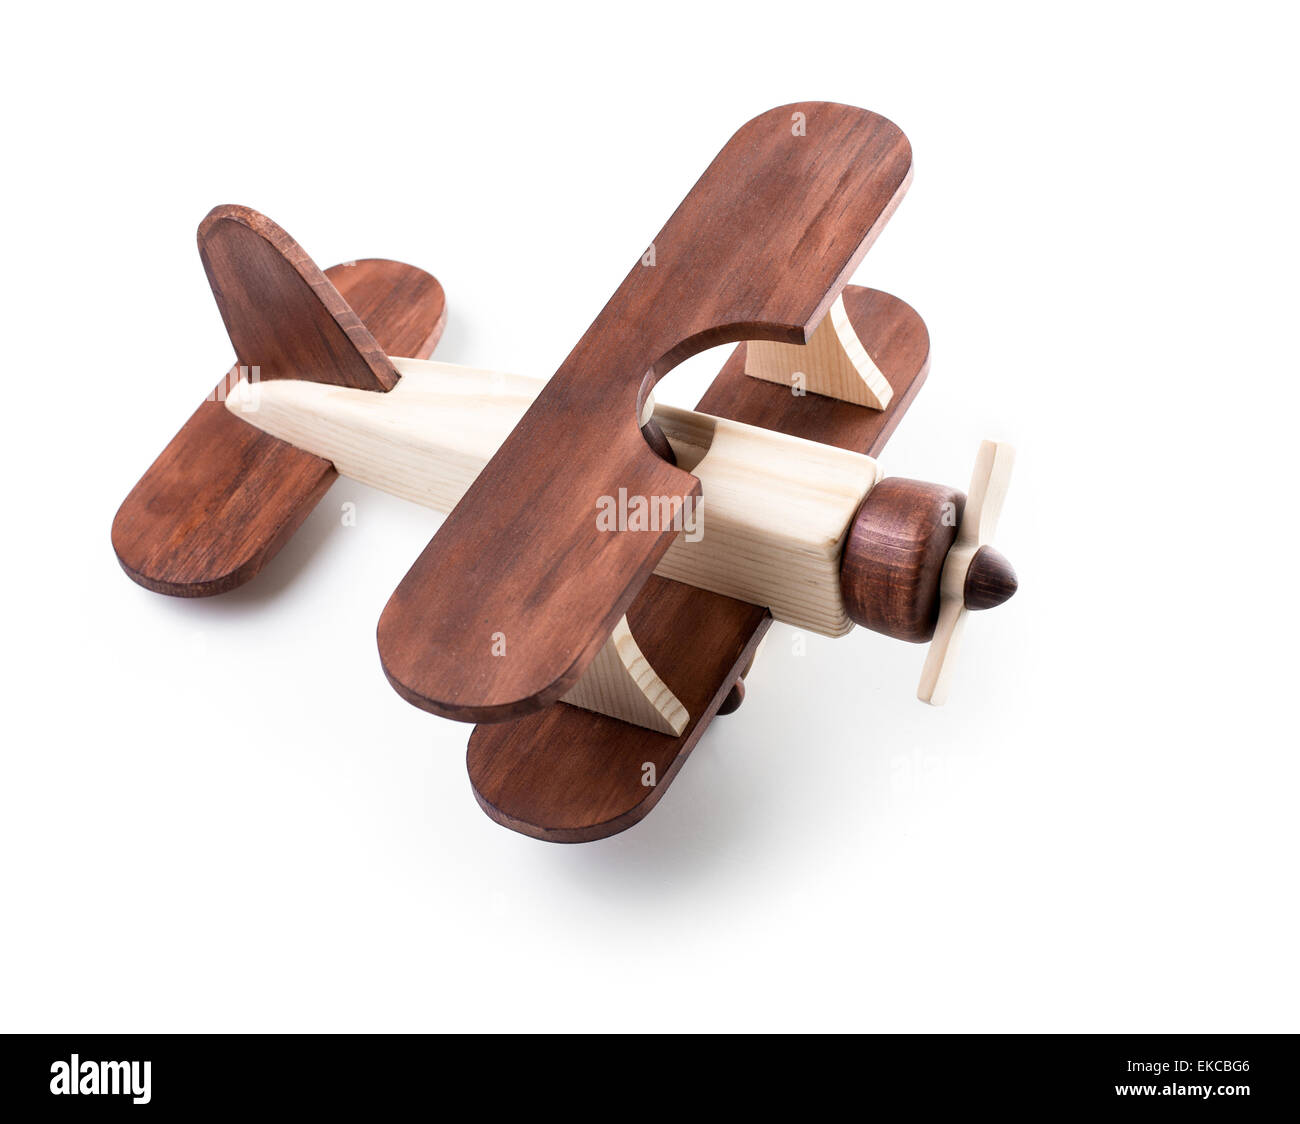 Wooden airplane model from above view isolated Stock Photo